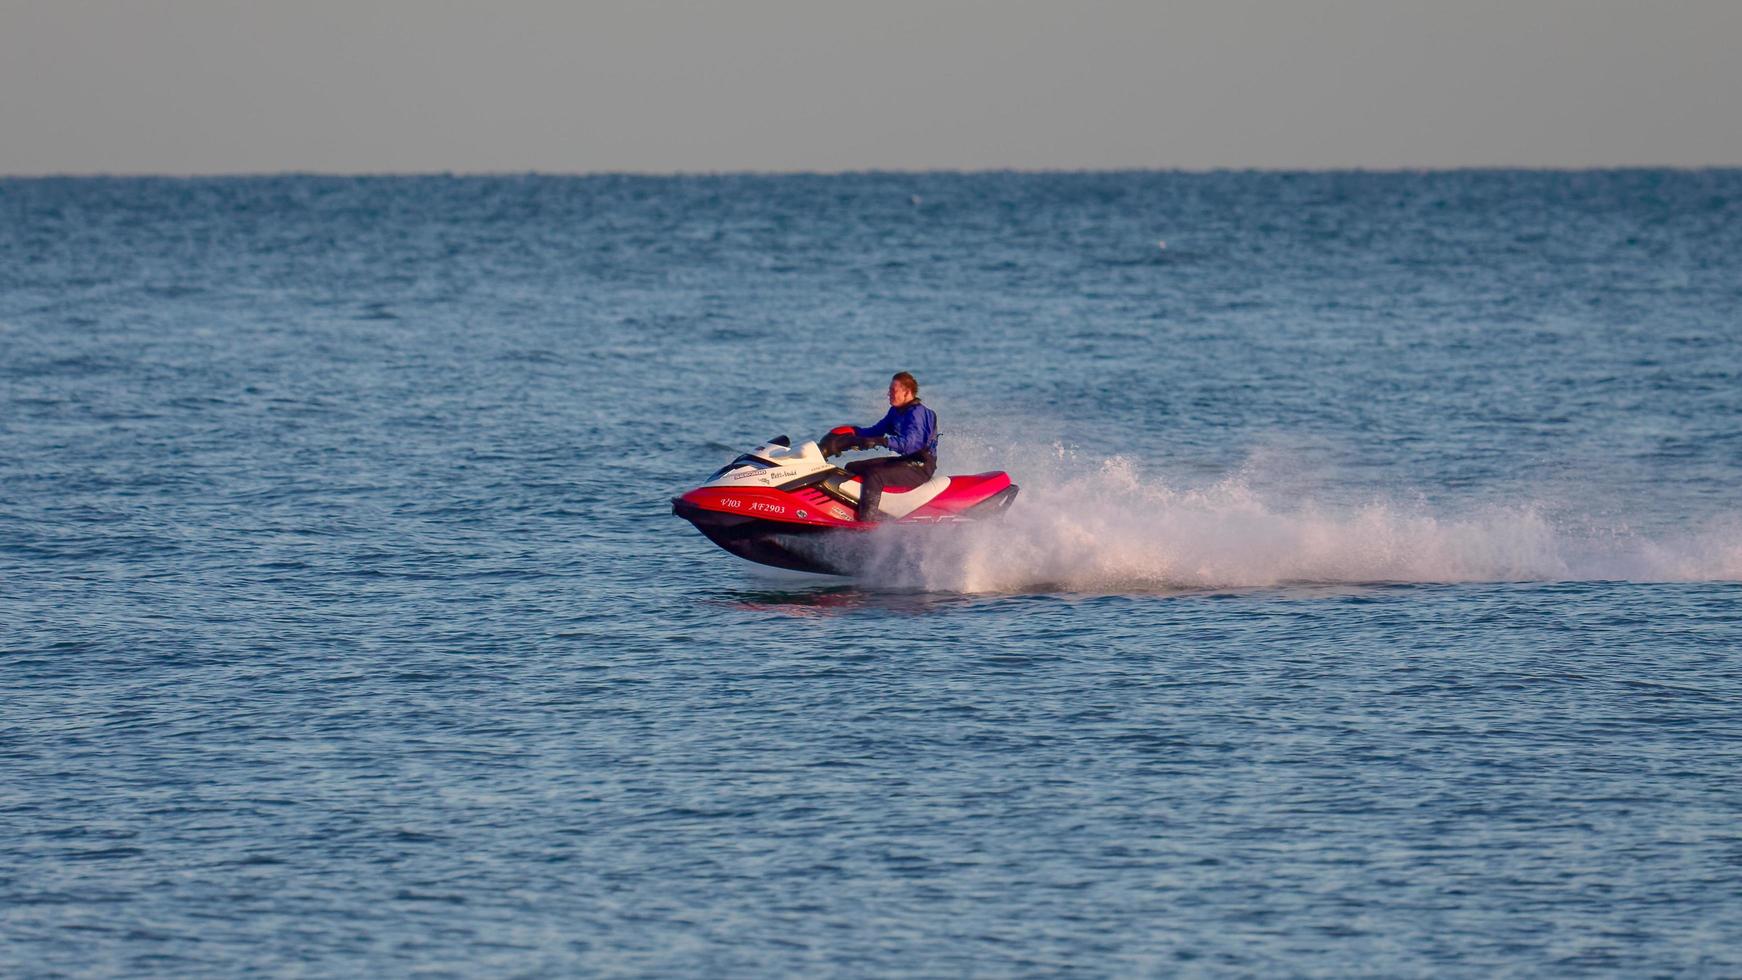 Man riding a jet ski off Dungeness beach in Kent on December 17, 2008. One unidentified person photo